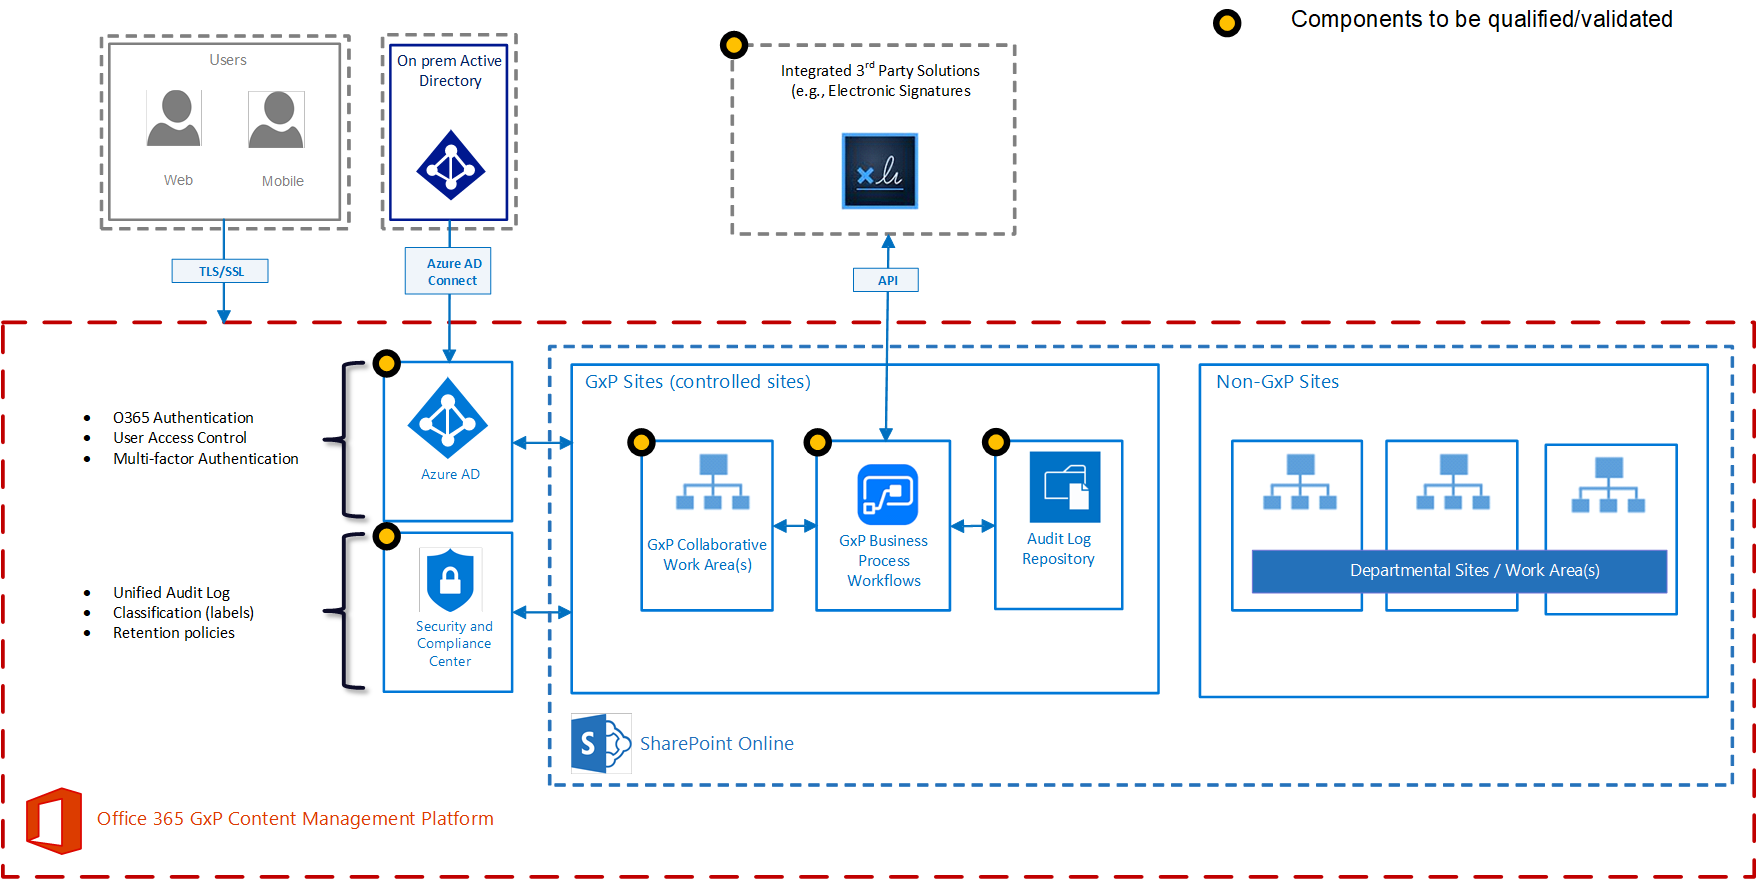 Getting Started With Gxp Processes In Office 365  The